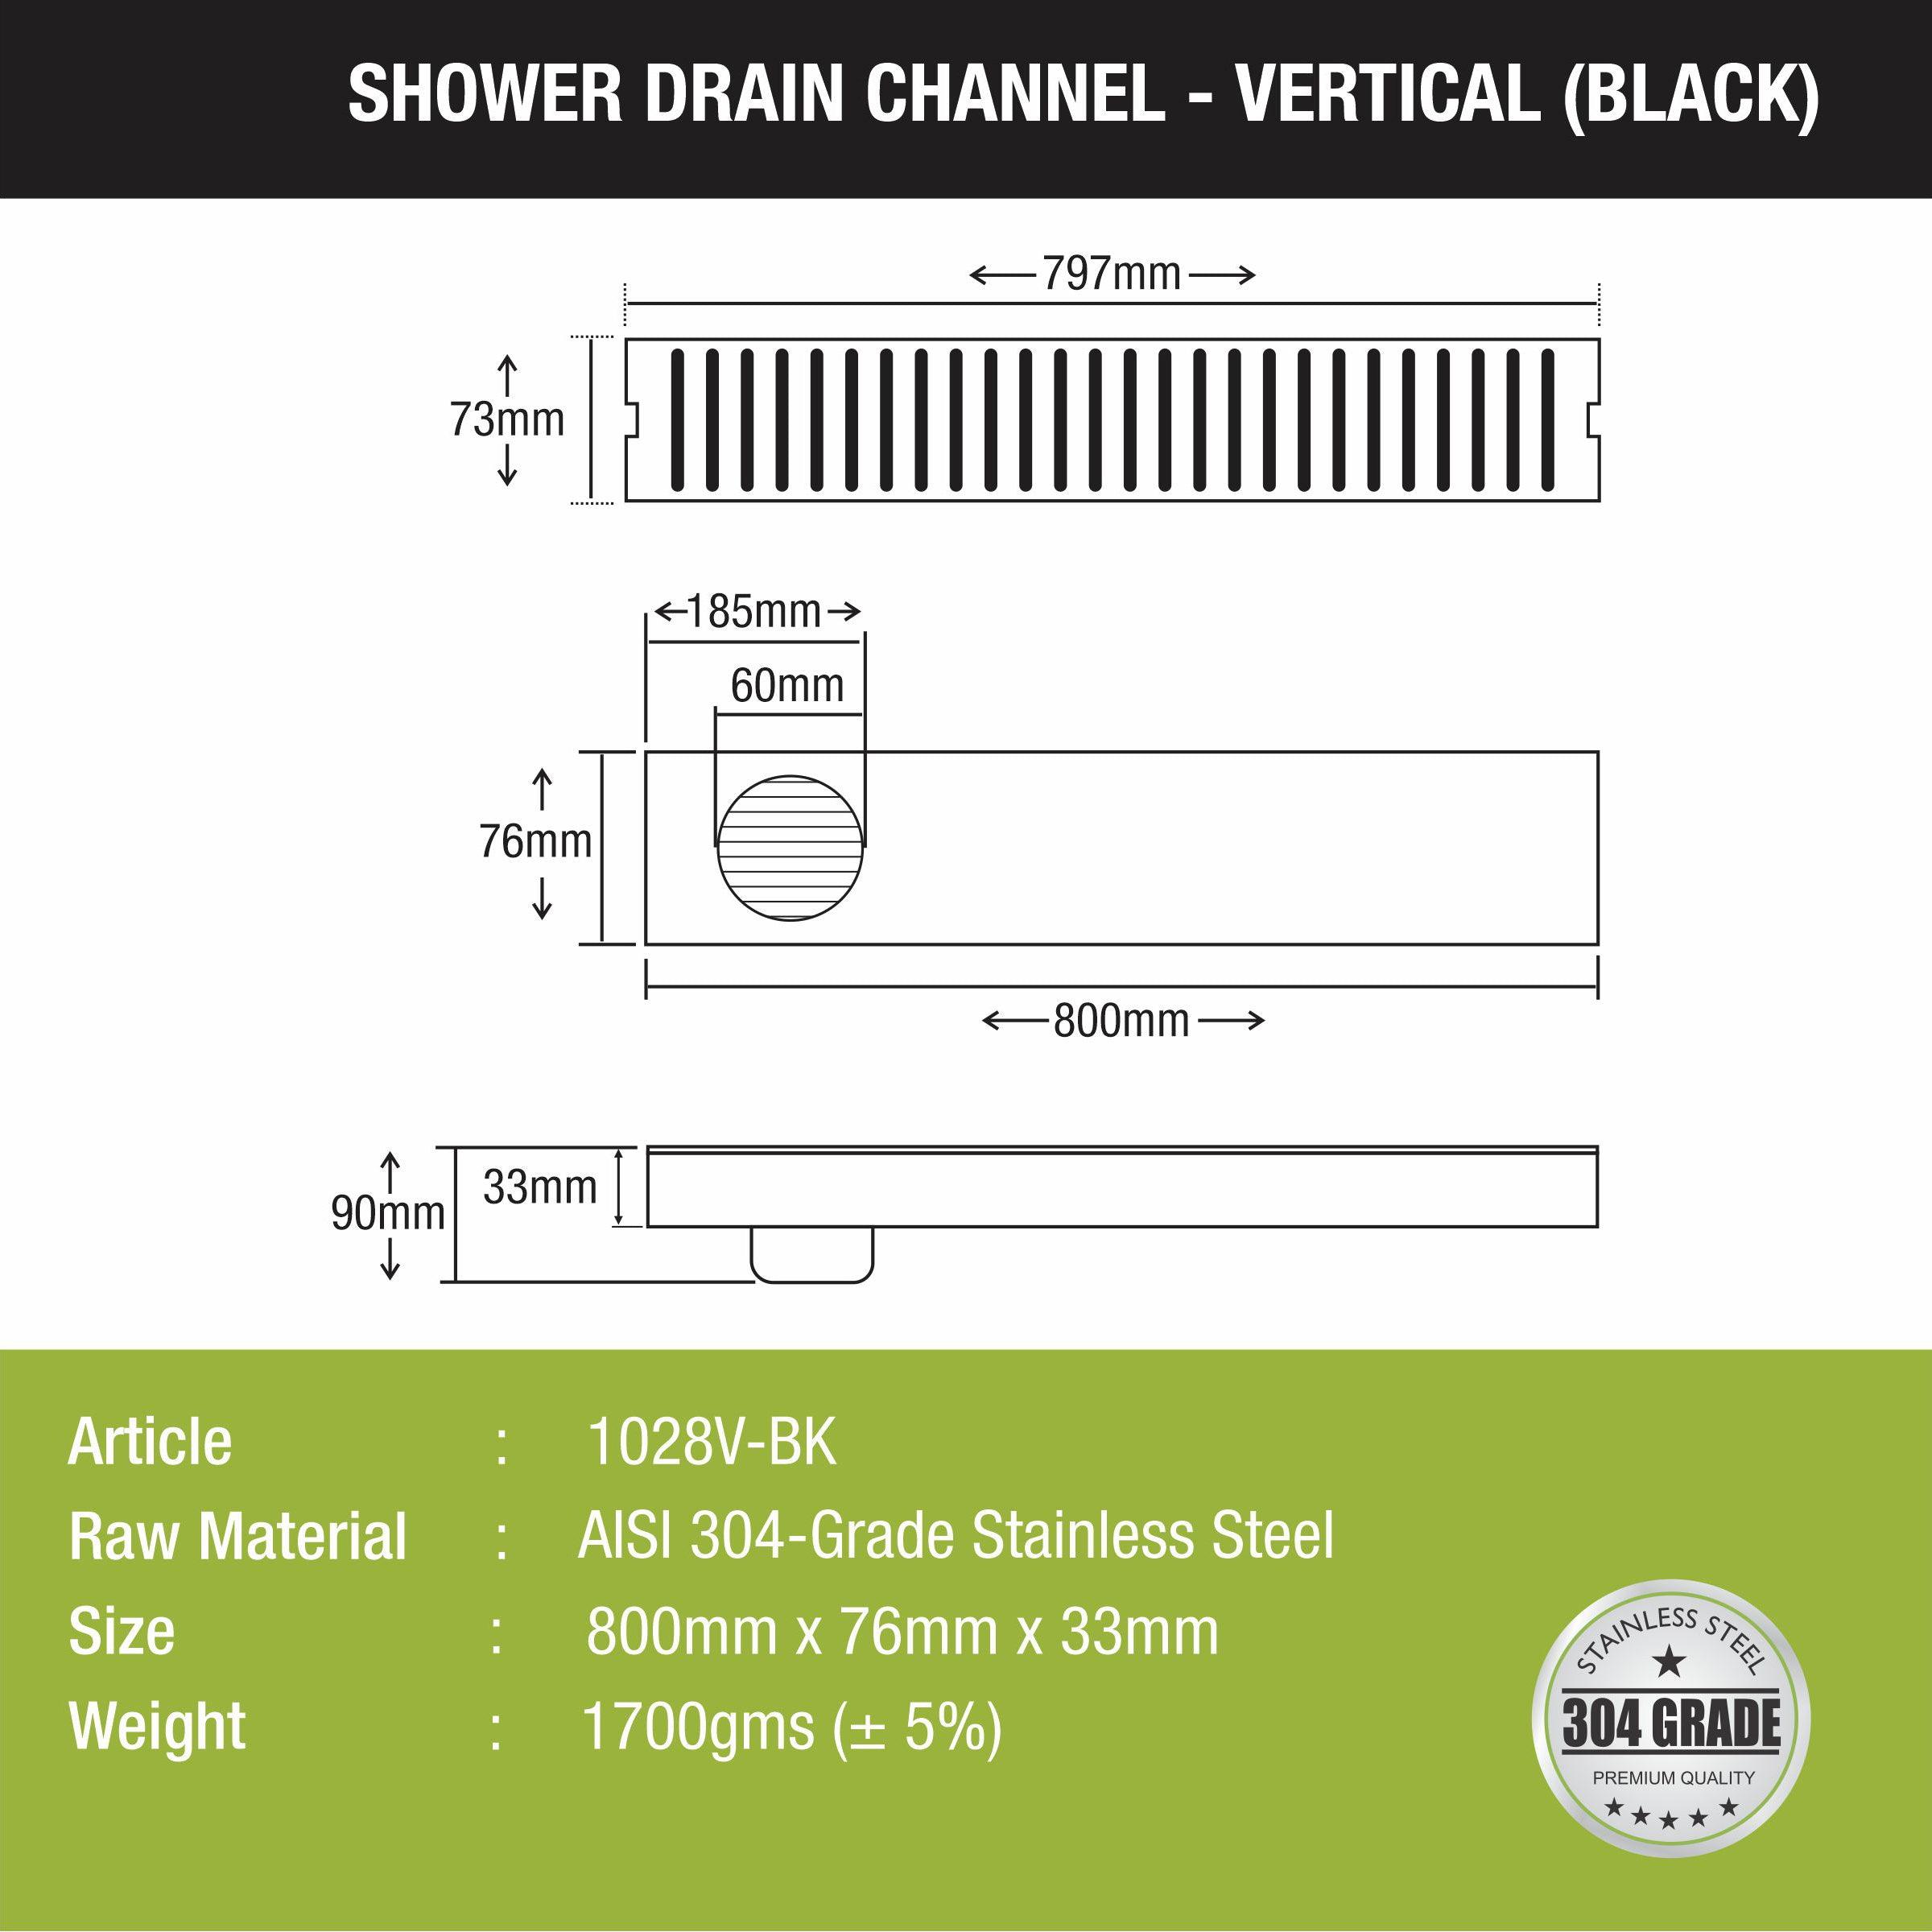 Vertical Shower Drain Channel - Black (32 x 3 Inches) size and measurement